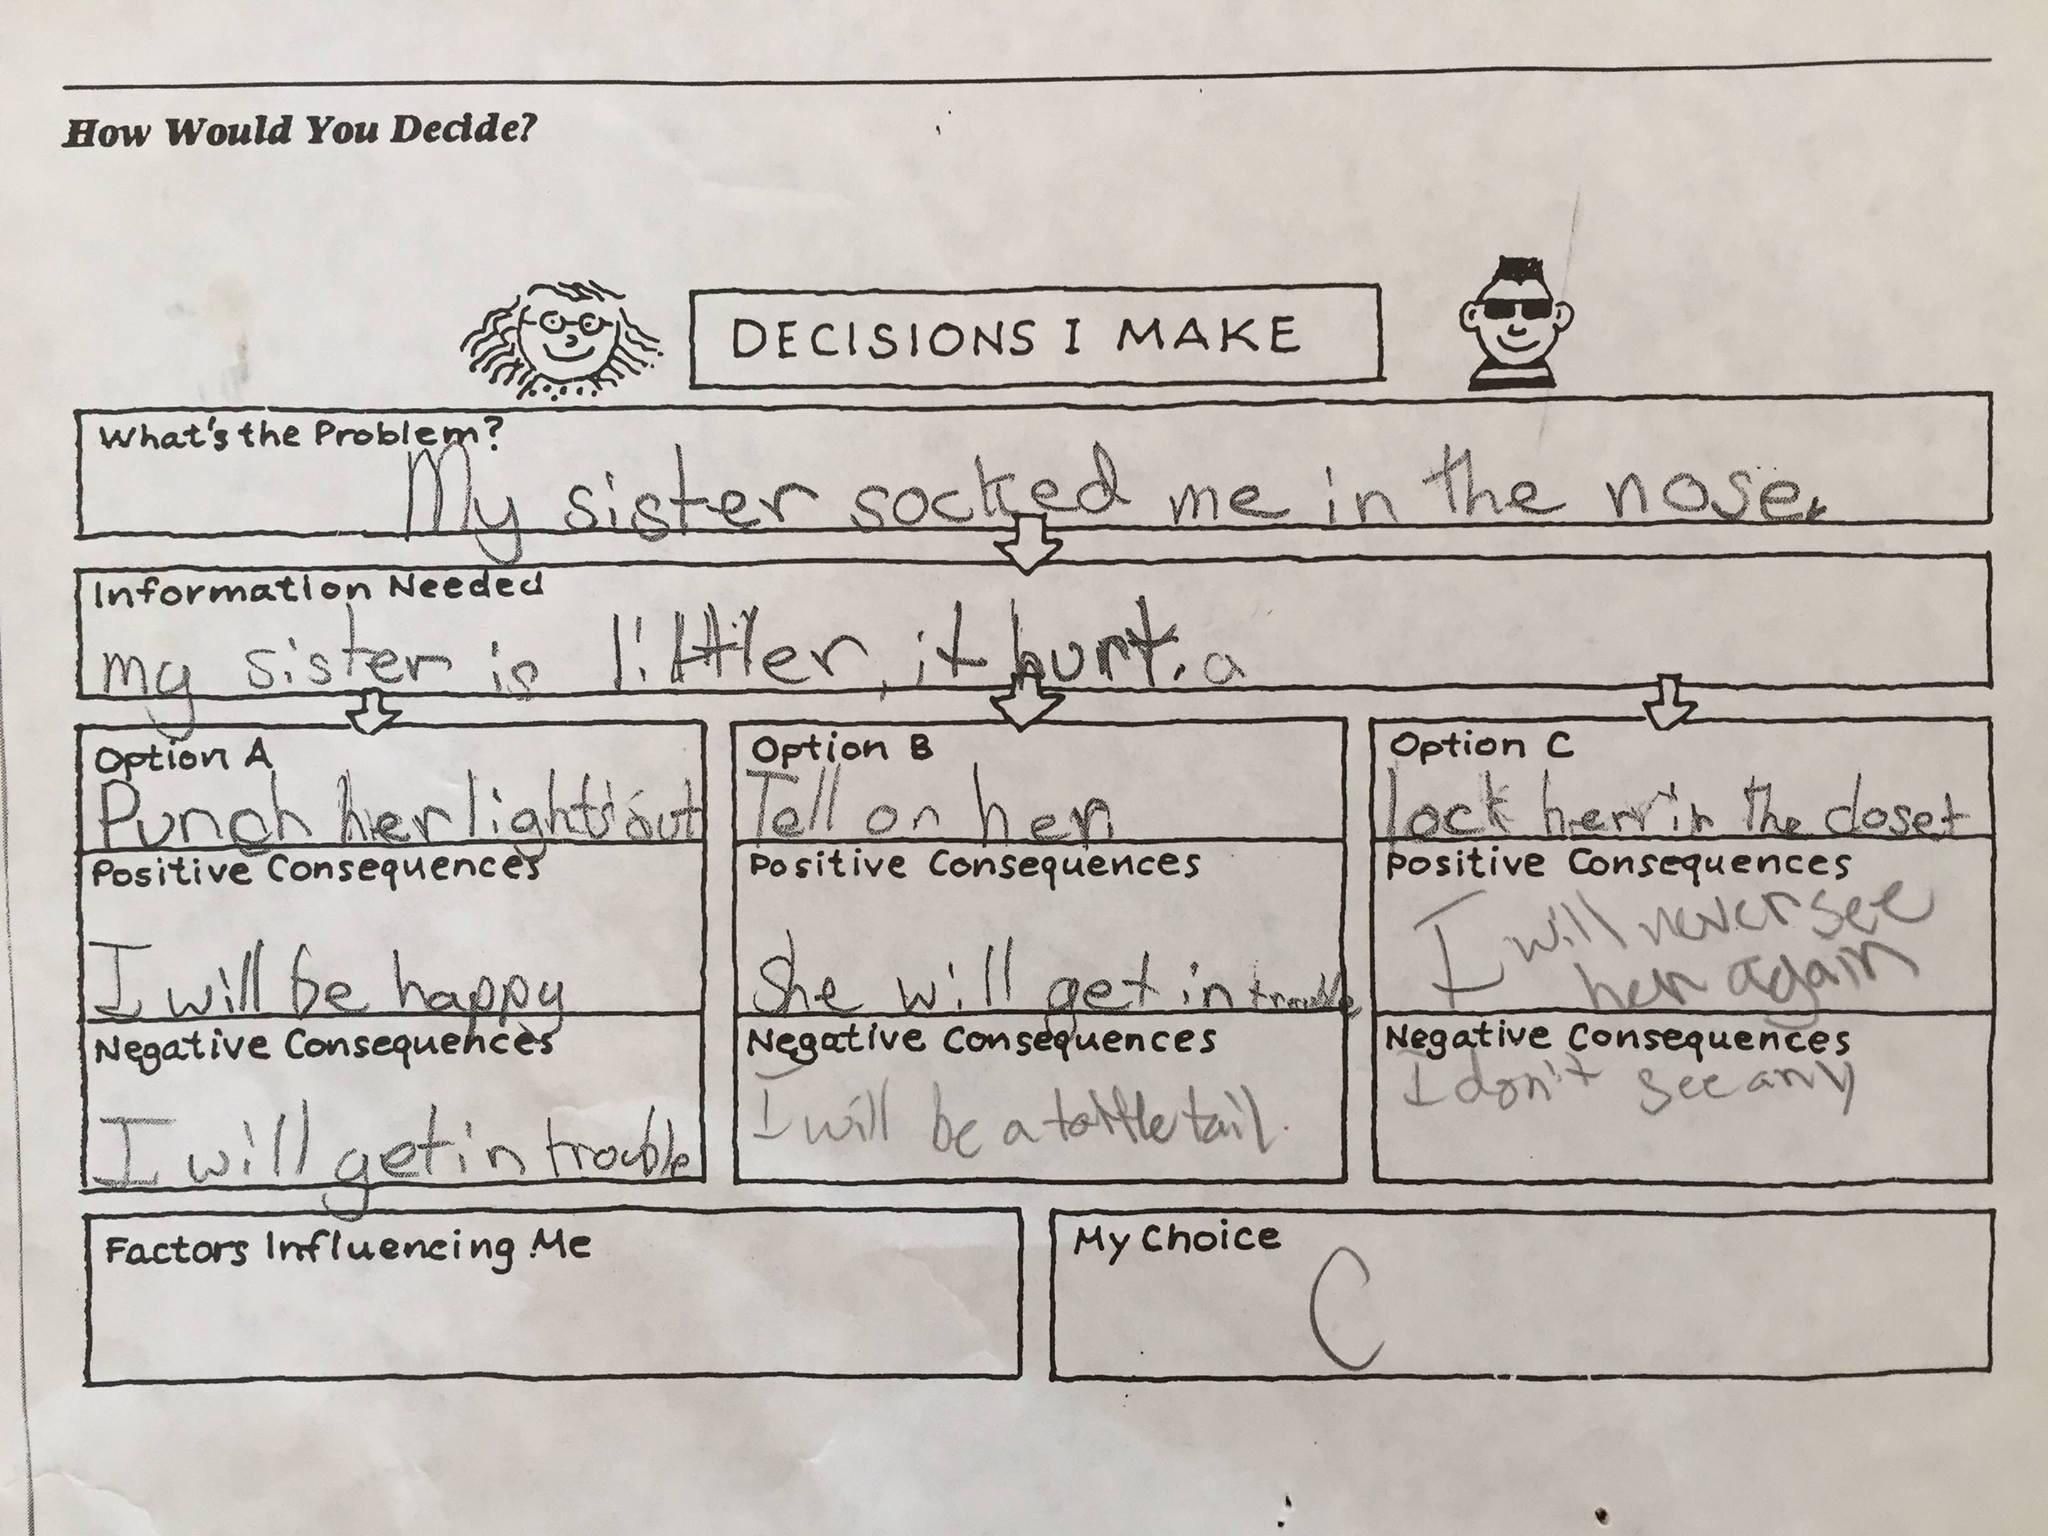 Decision tree from a 3rd grader found in an attic.